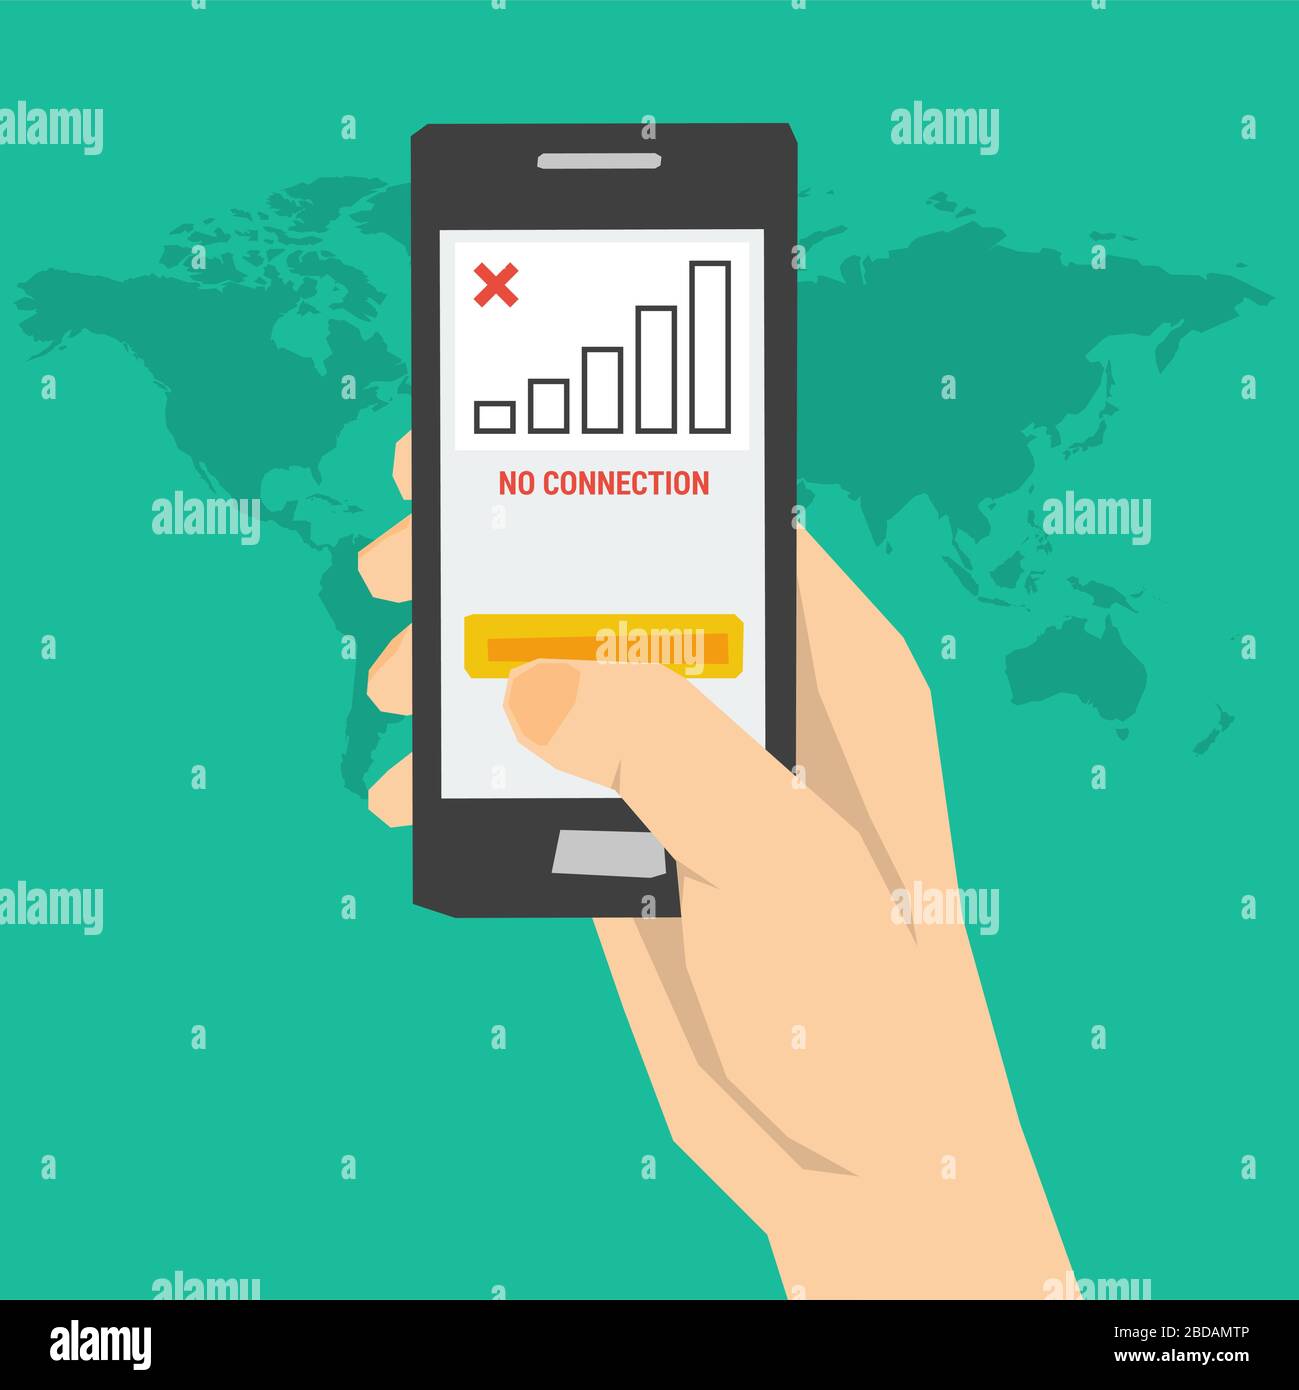 no connection - hand with phone Stock Vector